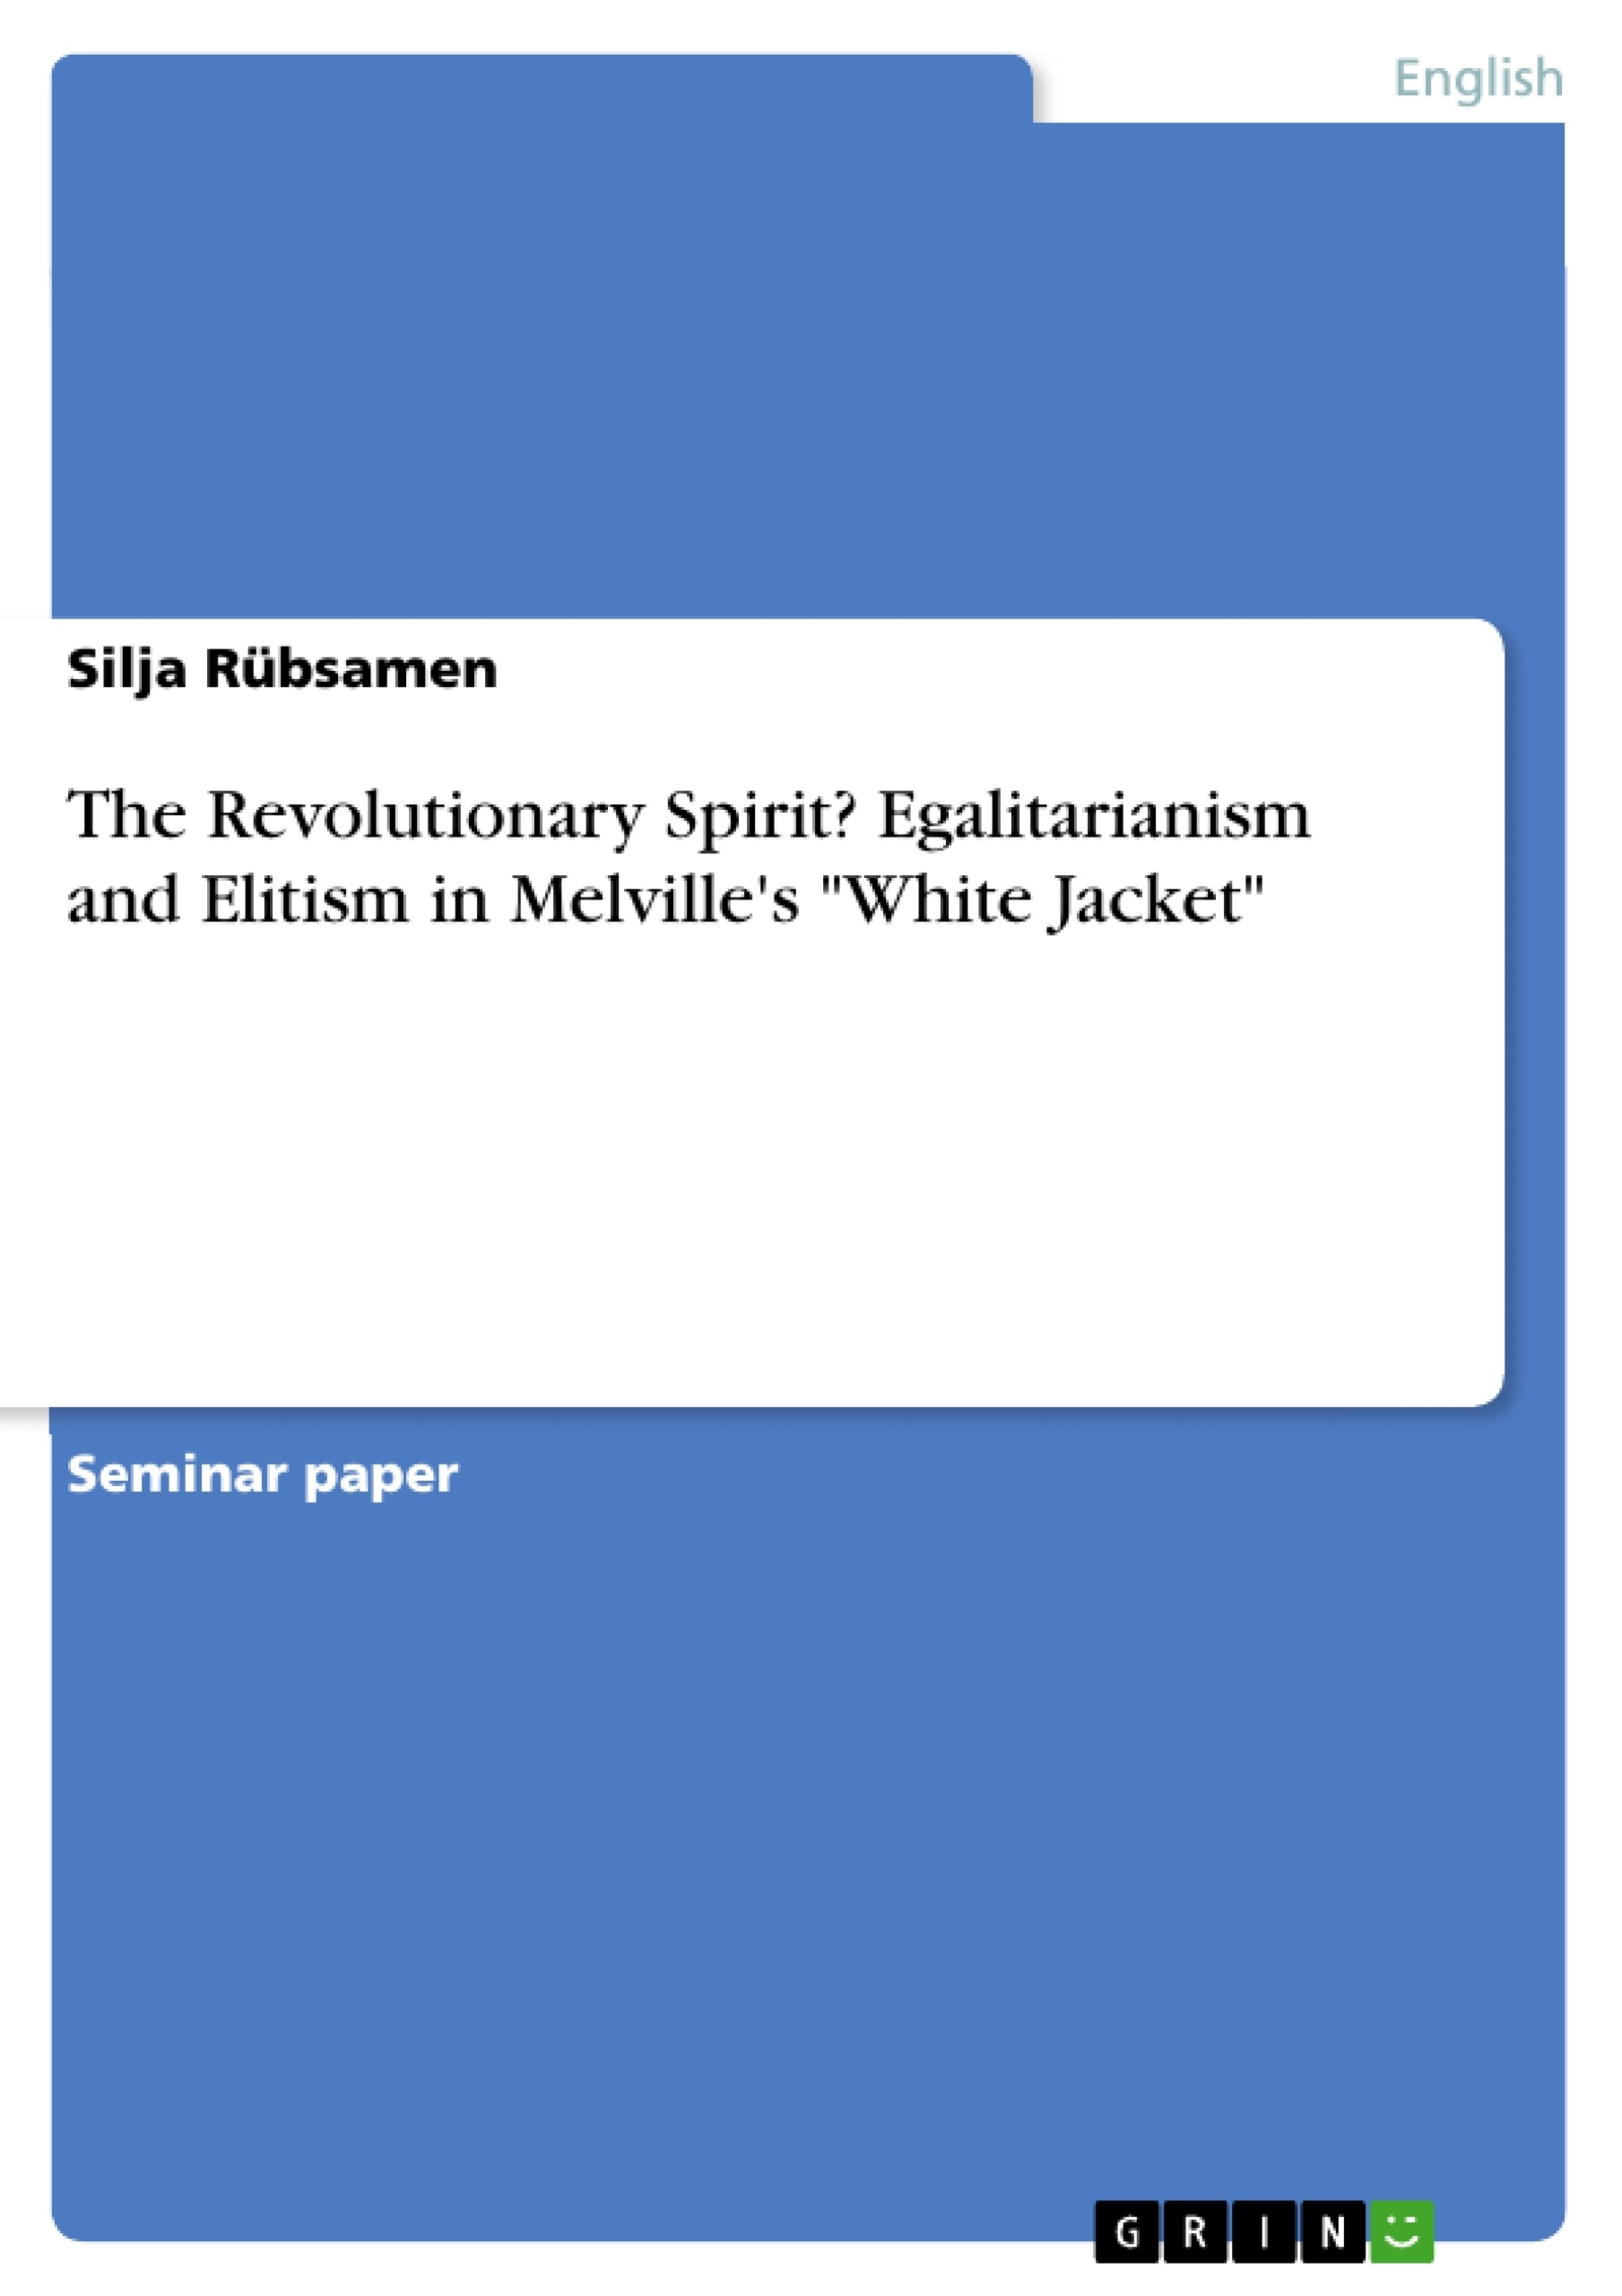 Titre: The Revolutionary Spirit? Egalitarianism and Elitism in Melville's "White Jacket"